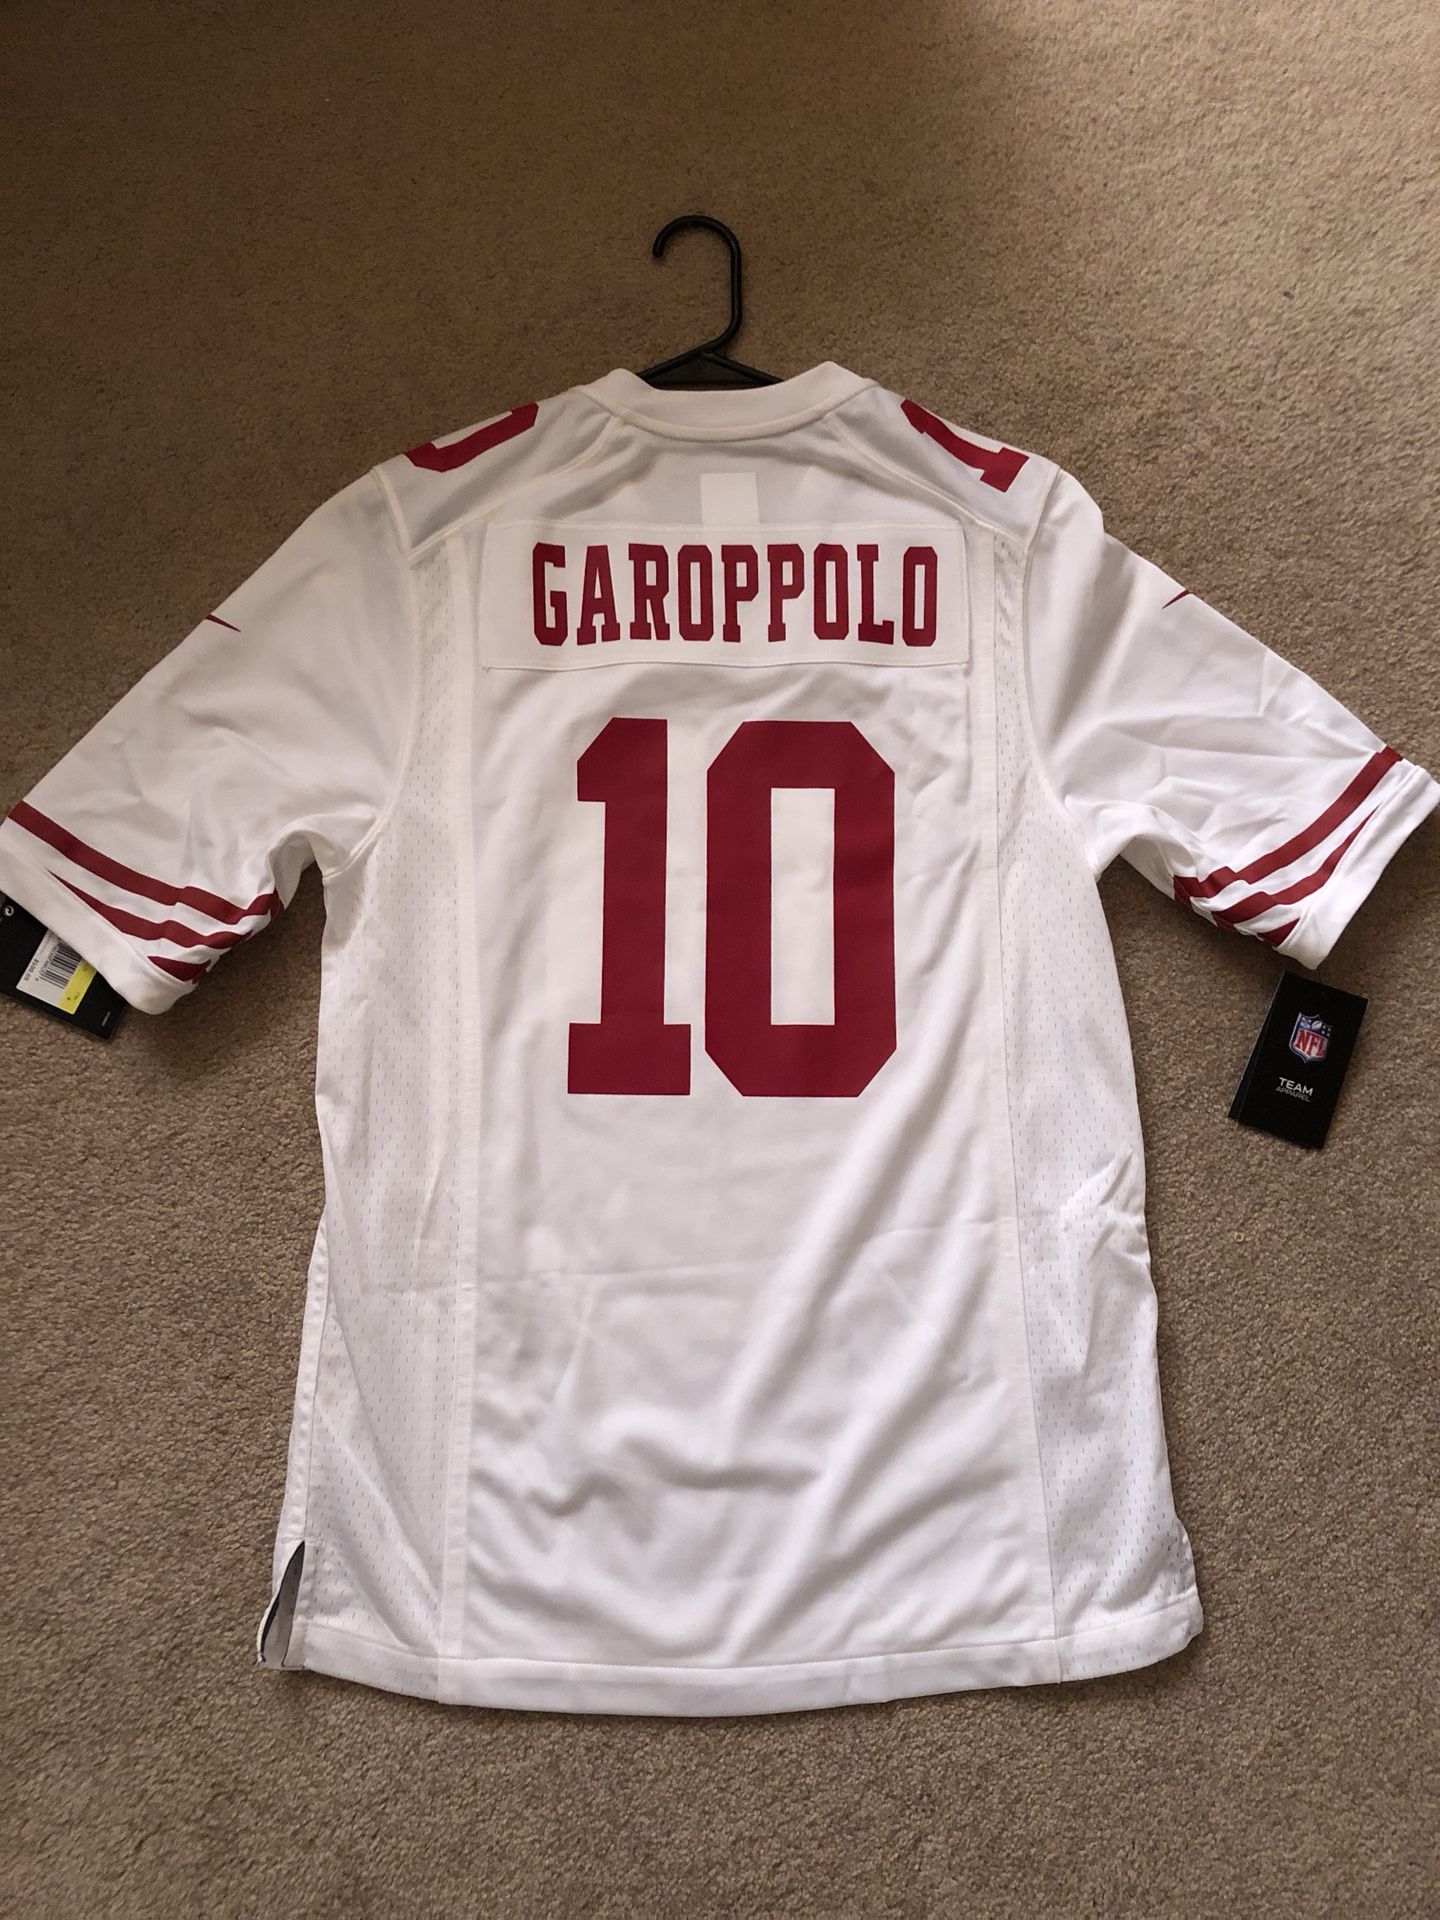 49ers Jimmy Garoppolo Jersey Nike Game for Sale in San Jose, CA - OfferUp